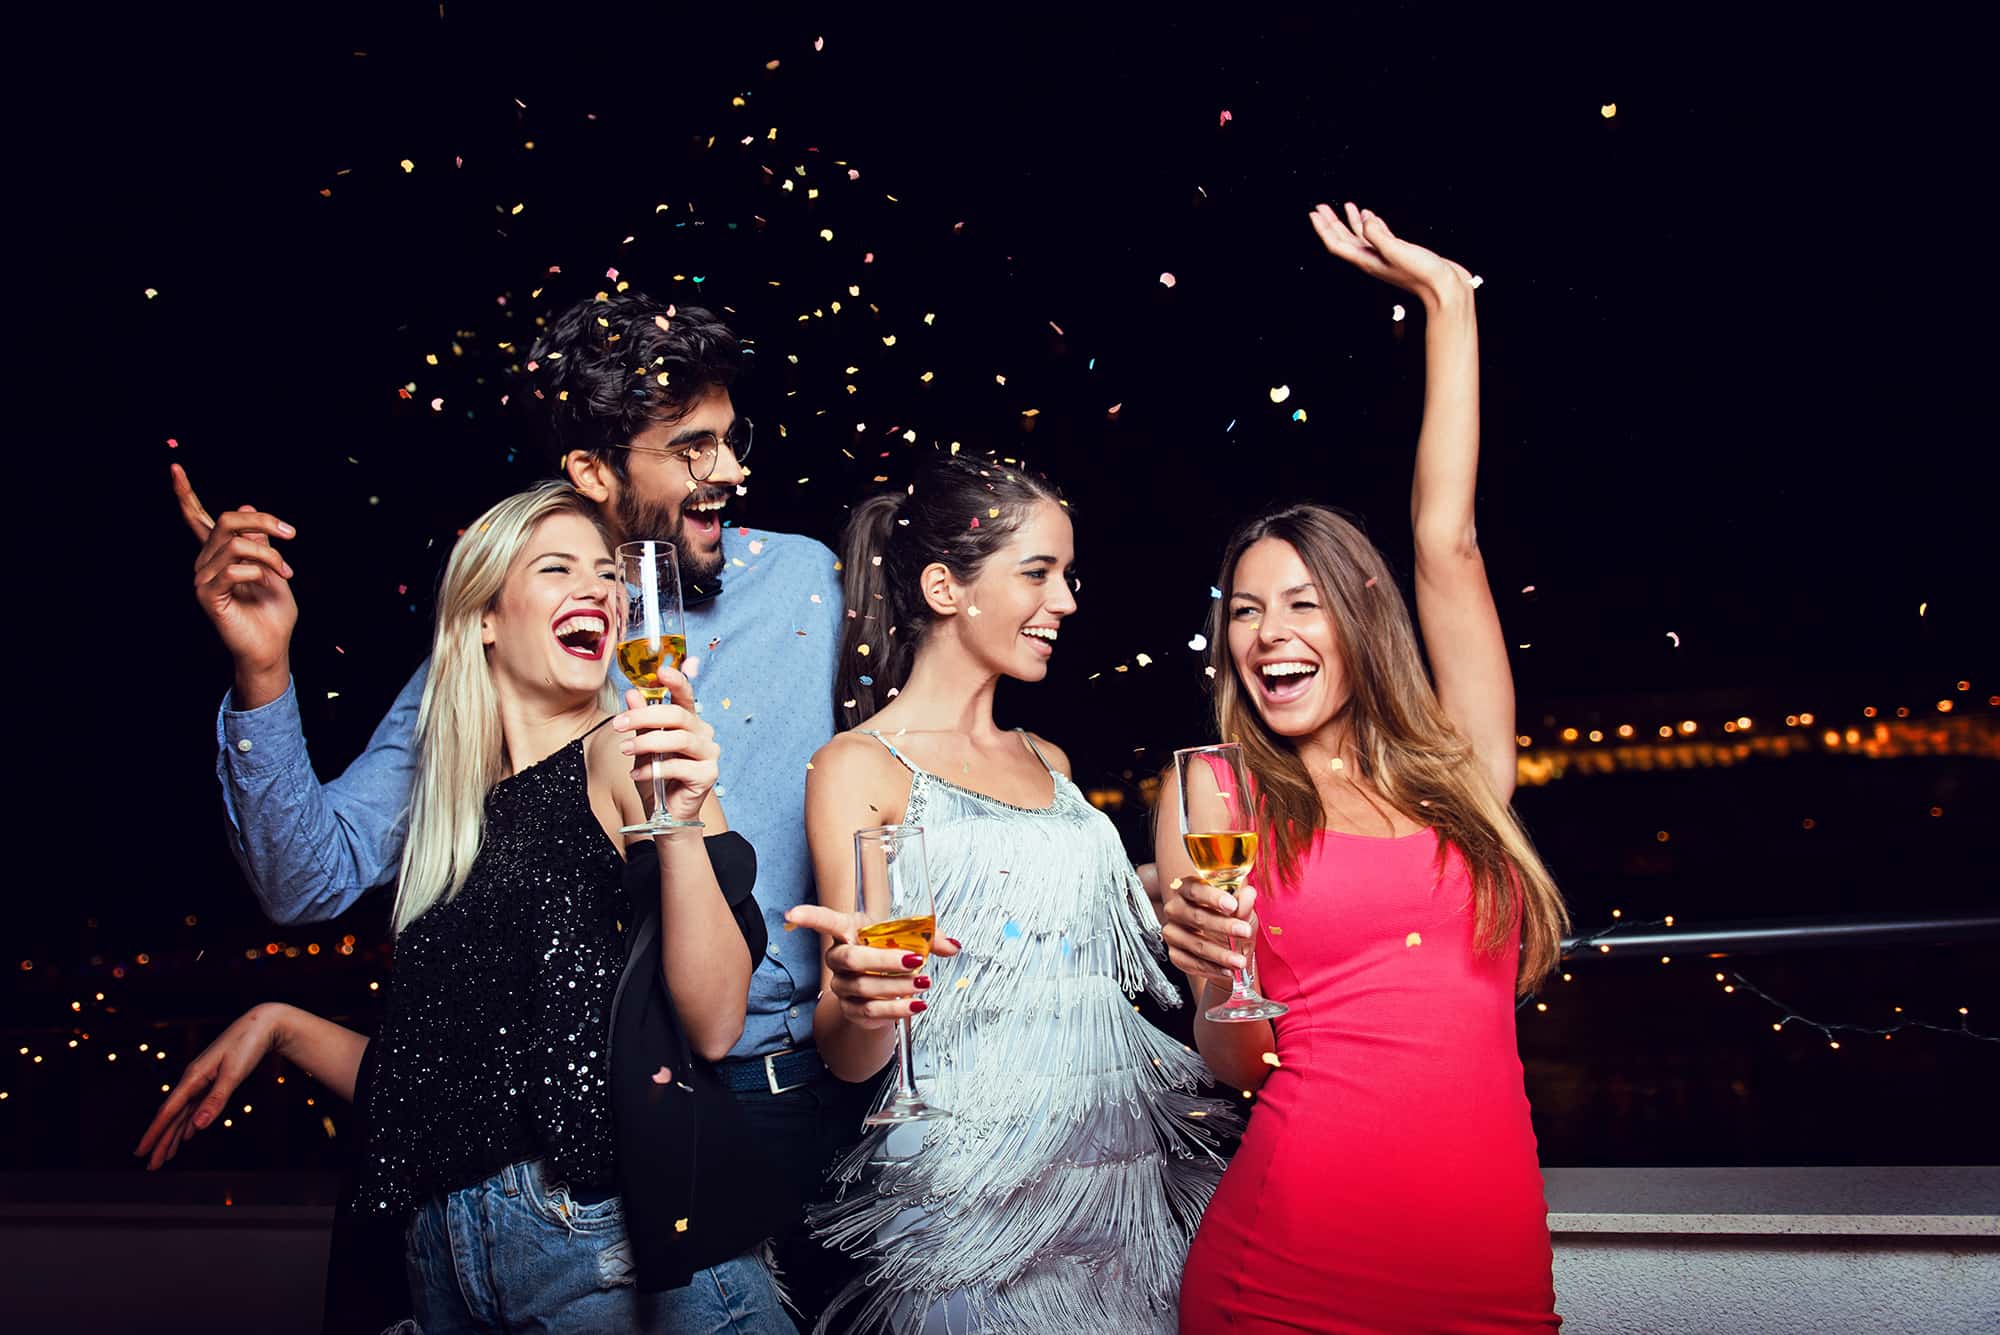 Women with champagne and a man partying